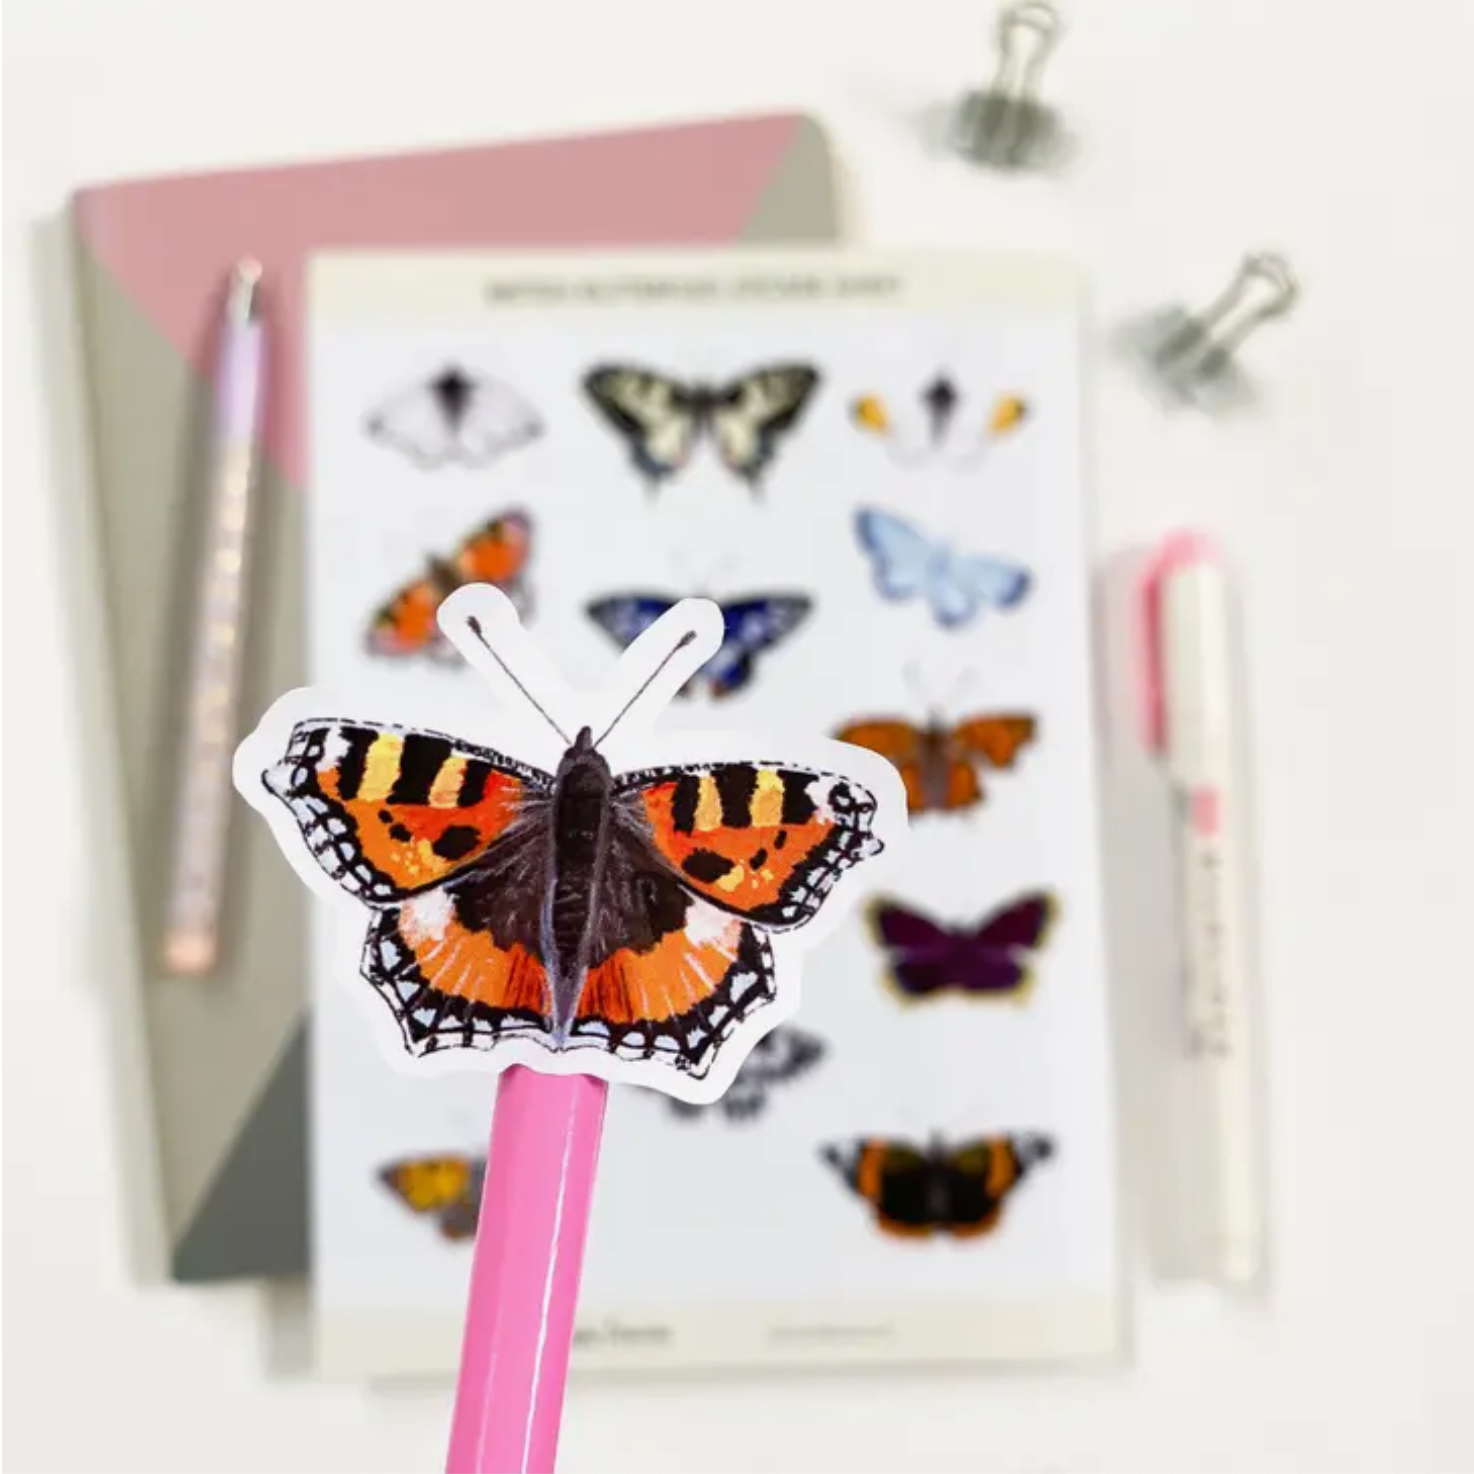 Celebrate the grace of British butterflies with our British Butterflies Sticker Sheet, featuring delicate illustrations of native butterfly species. Ideal for adding a touch of natural beauty and elegance to your crafts. These stickers are designed by Sarah Frances and sold at BBB Supplies Craft Shop.